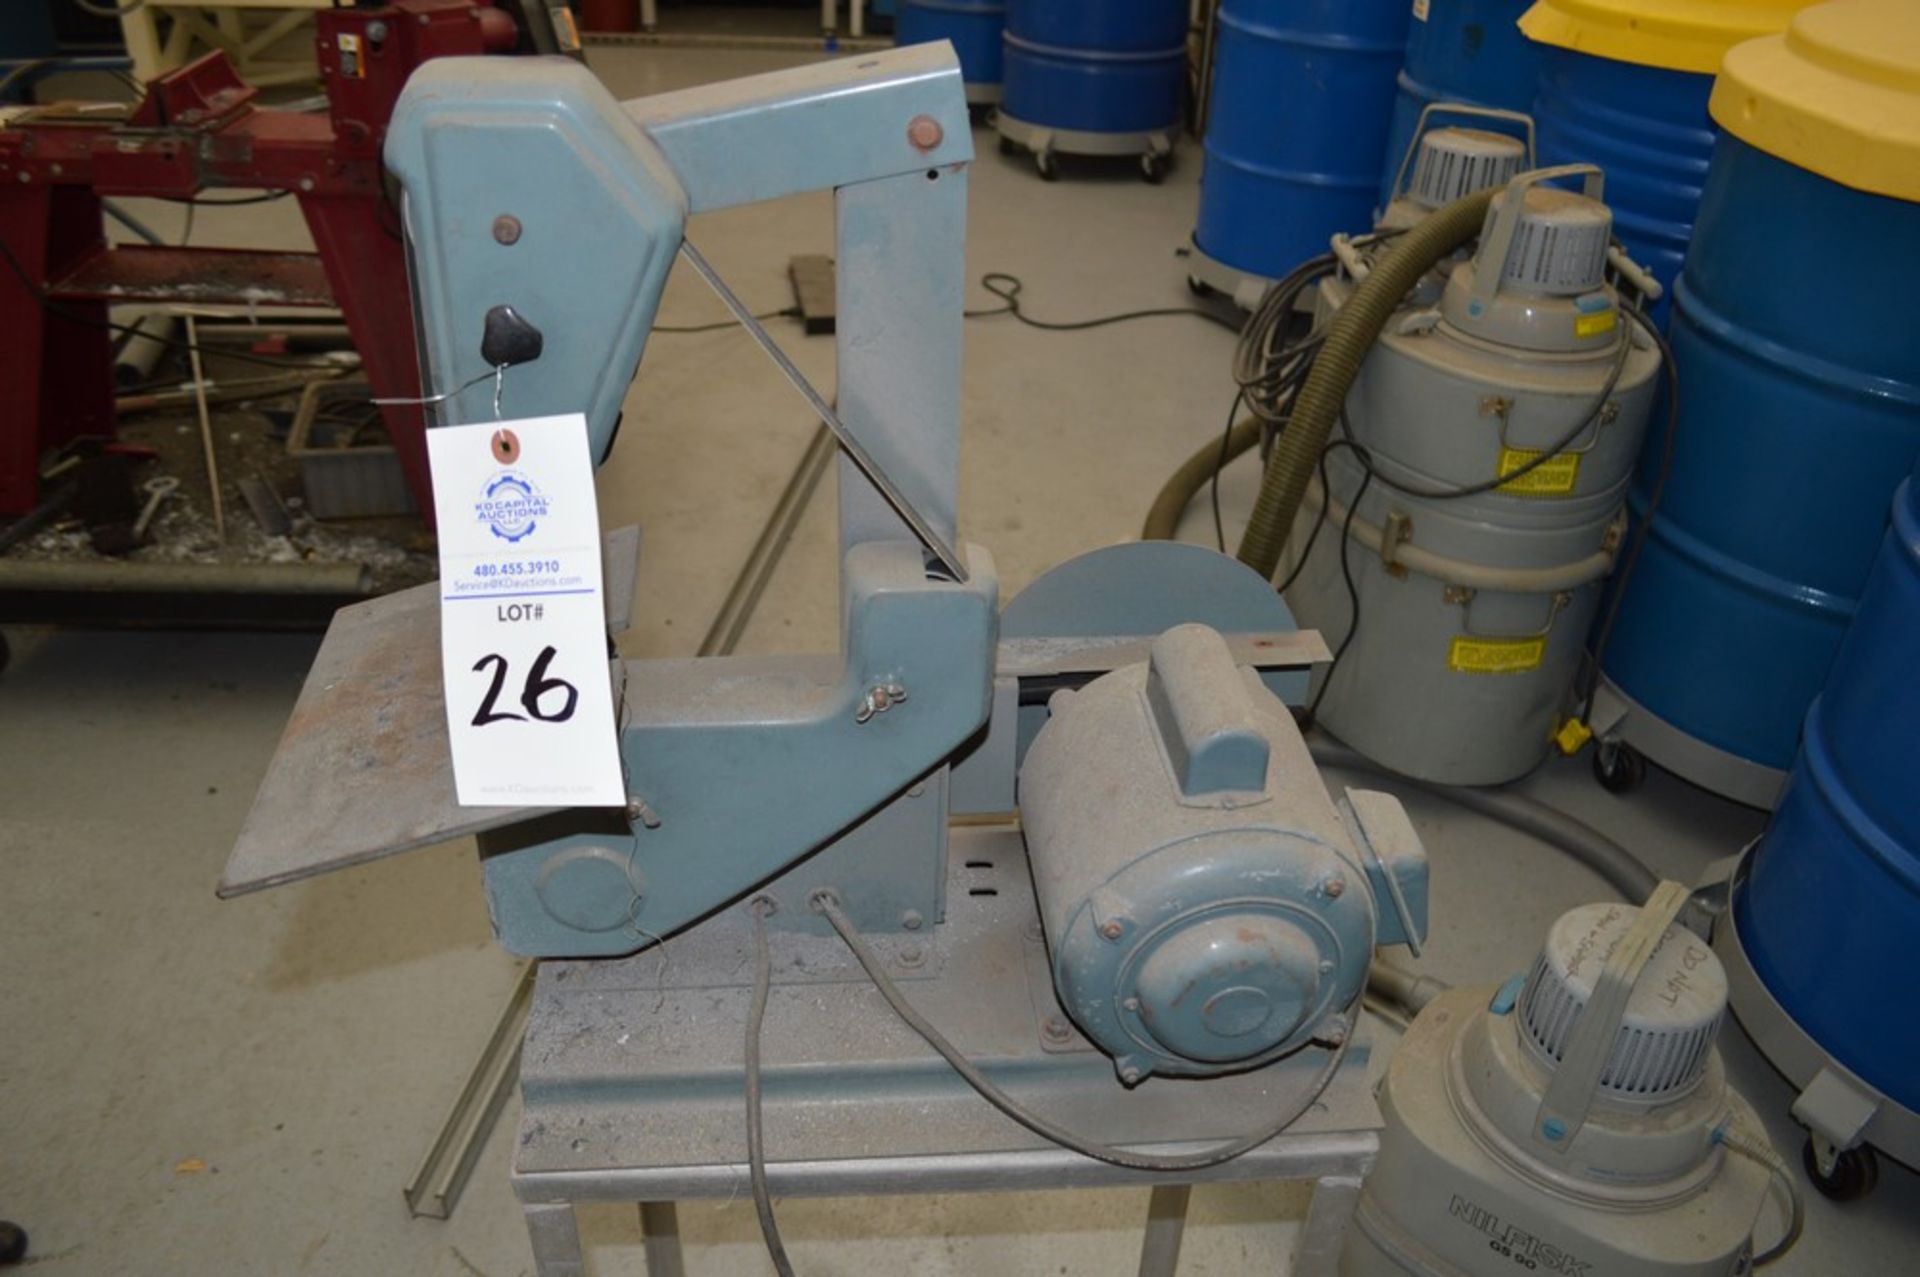 1" x 8" Belt and Disc Sander on small metal rolling stand - Image 3 of 5